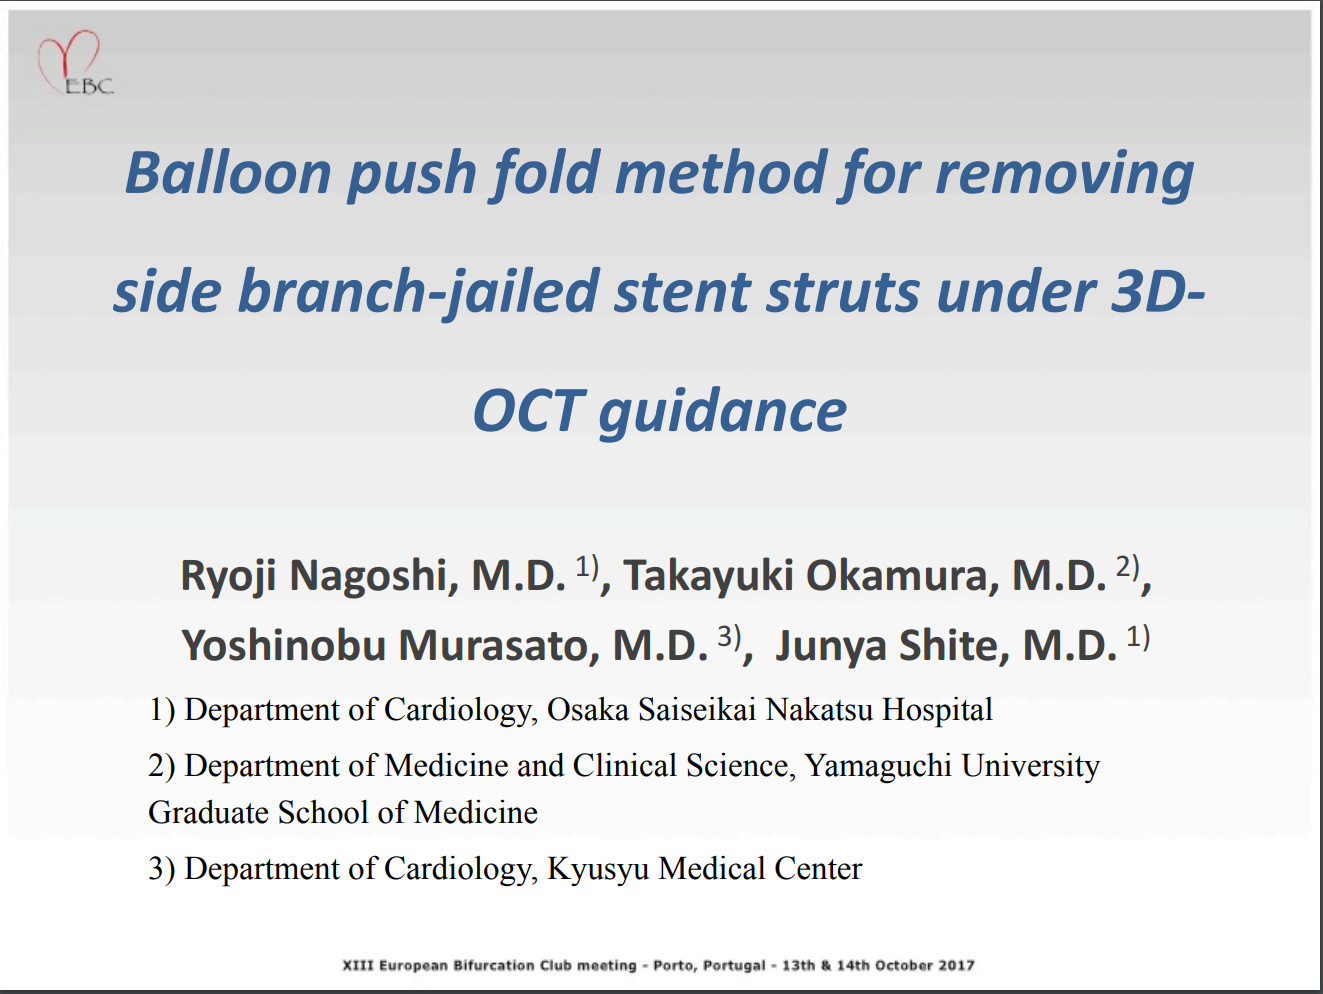 You are currently viewing Balloon push fold method for removing side branch-jailed stent struts under 3D-OCT guidance